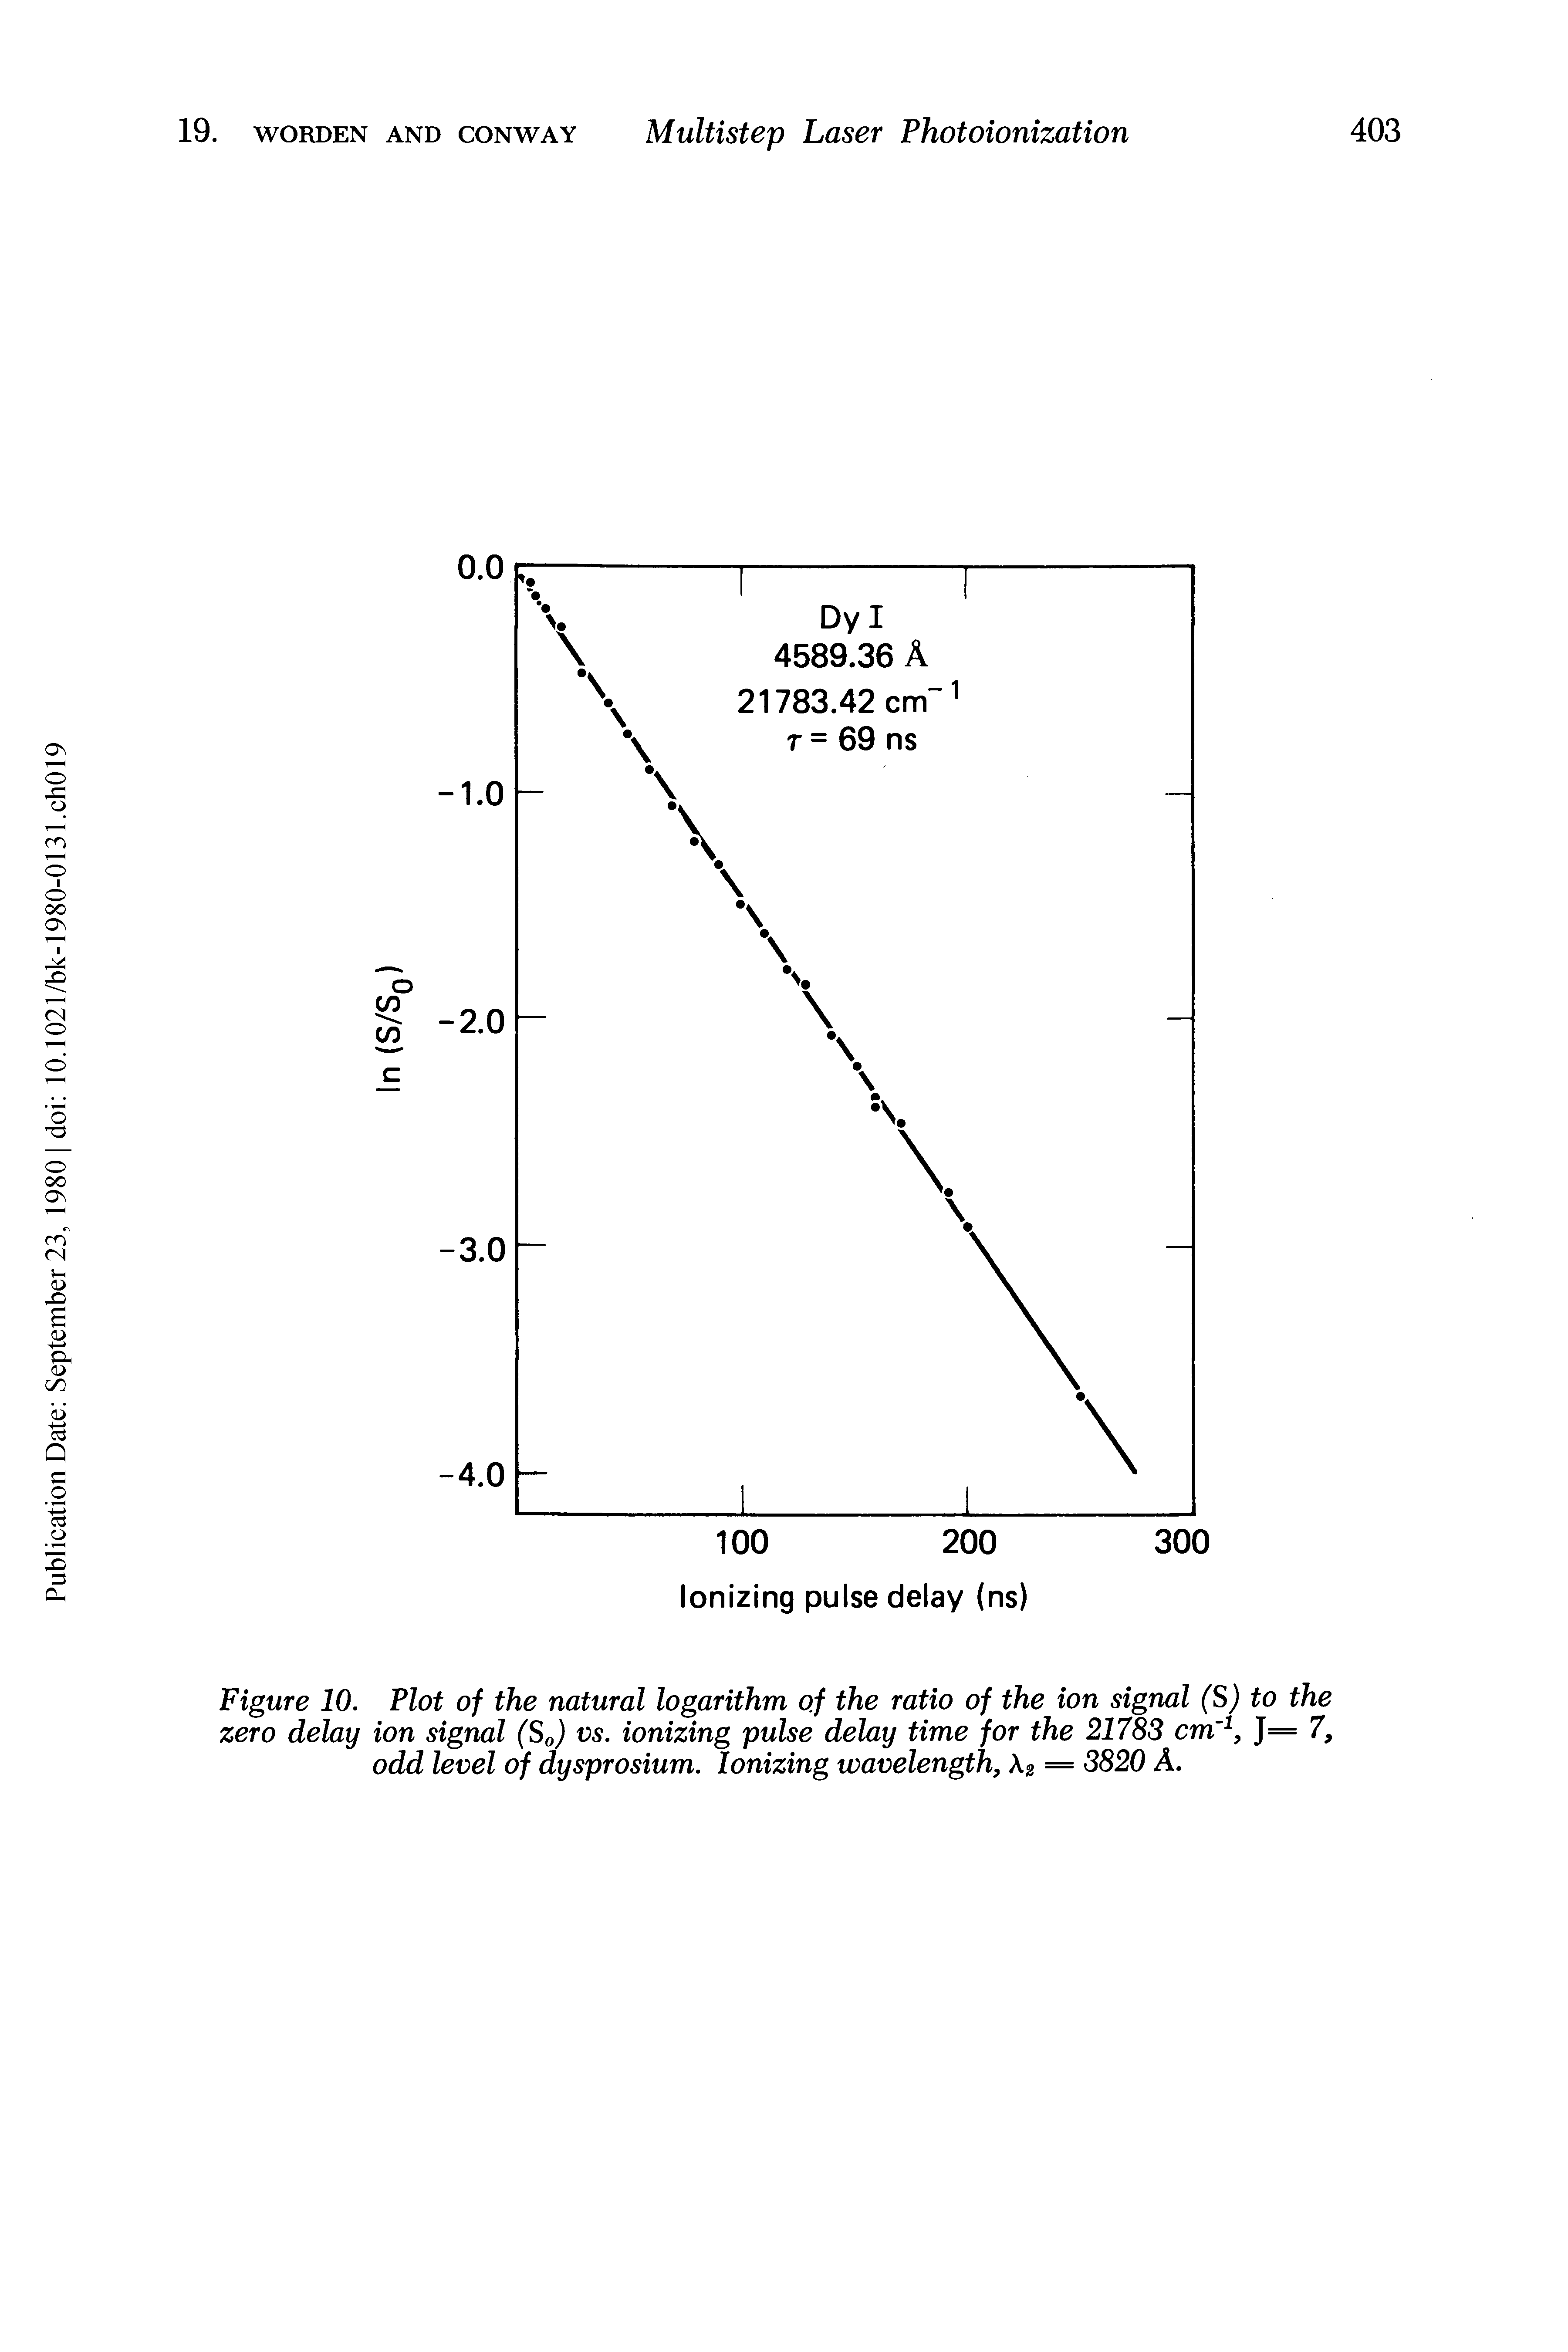 Figure 10. Plot of the natural logarithm of the ratio of the ion signal (S) to the zero delay ion signal (S0) vs. ionizing pulse delay time for the 21783 cm 1, J =7, odd level of dysprosium. Ionizing wavelength, 2 = 3820 A.